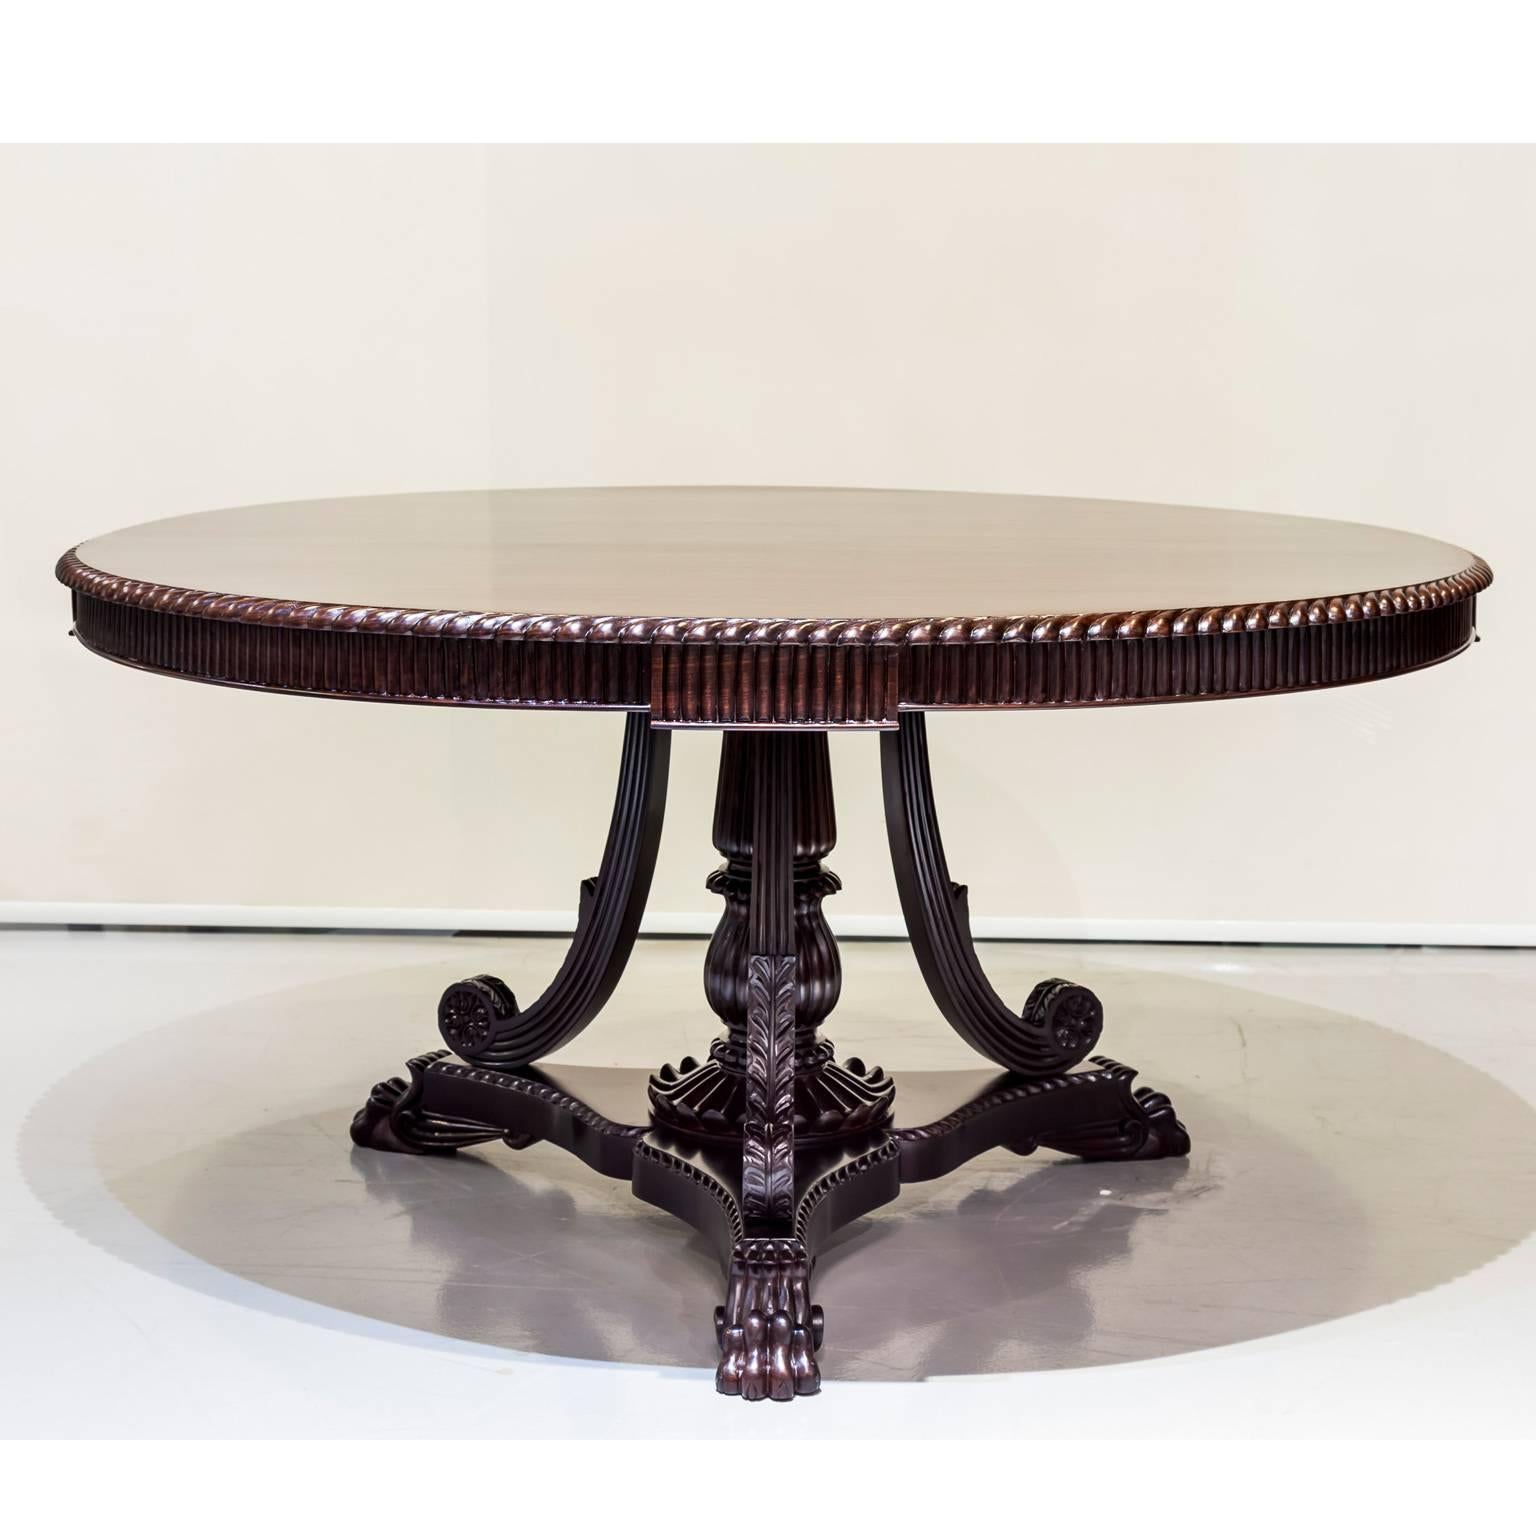 A beautiful British Colonial dining, or center table in rosewood.
The large circular top with gadrooning on the edge above the carved apron. It is supported on a column that is surrounded by three curved and scrolled spindles and rests on a flat